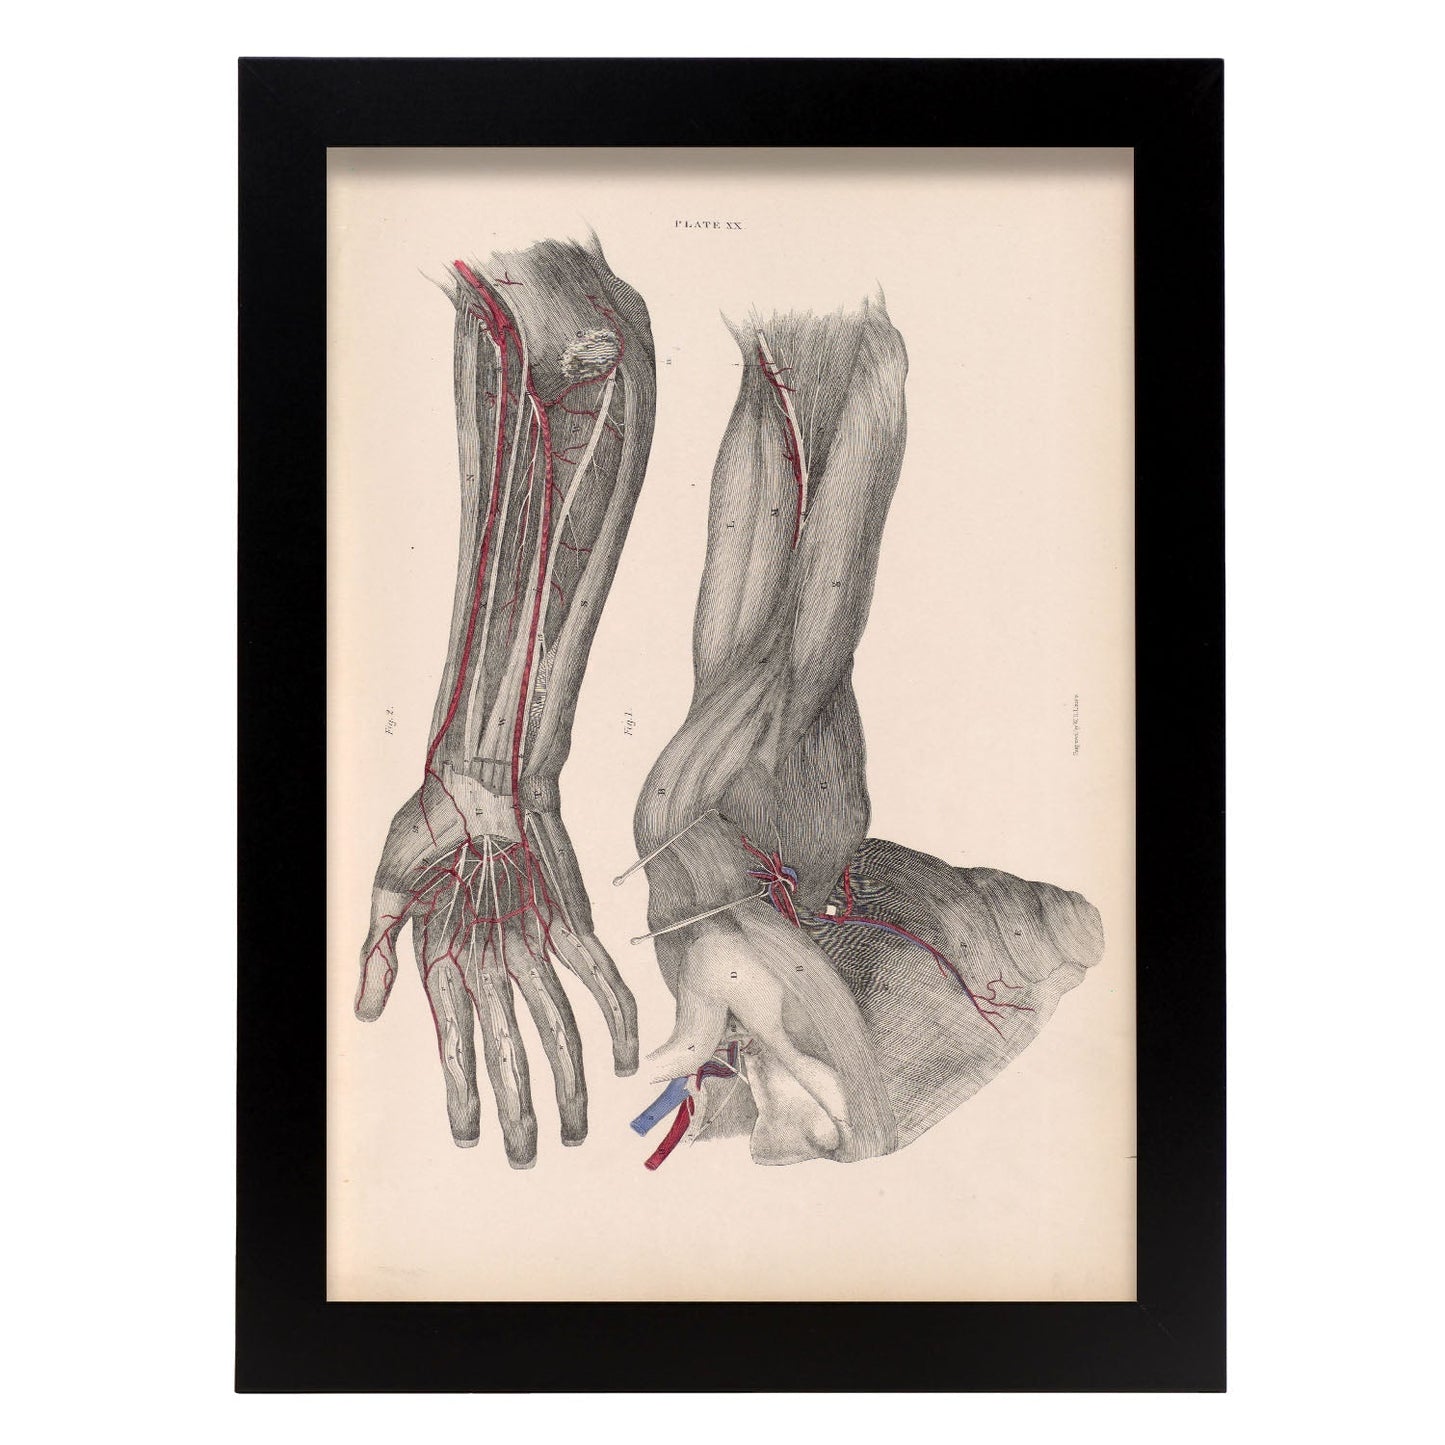 Dissection of the arm and hand-Artwork-Nacnic-A4-Sin marco-Nacnic Estudio SL